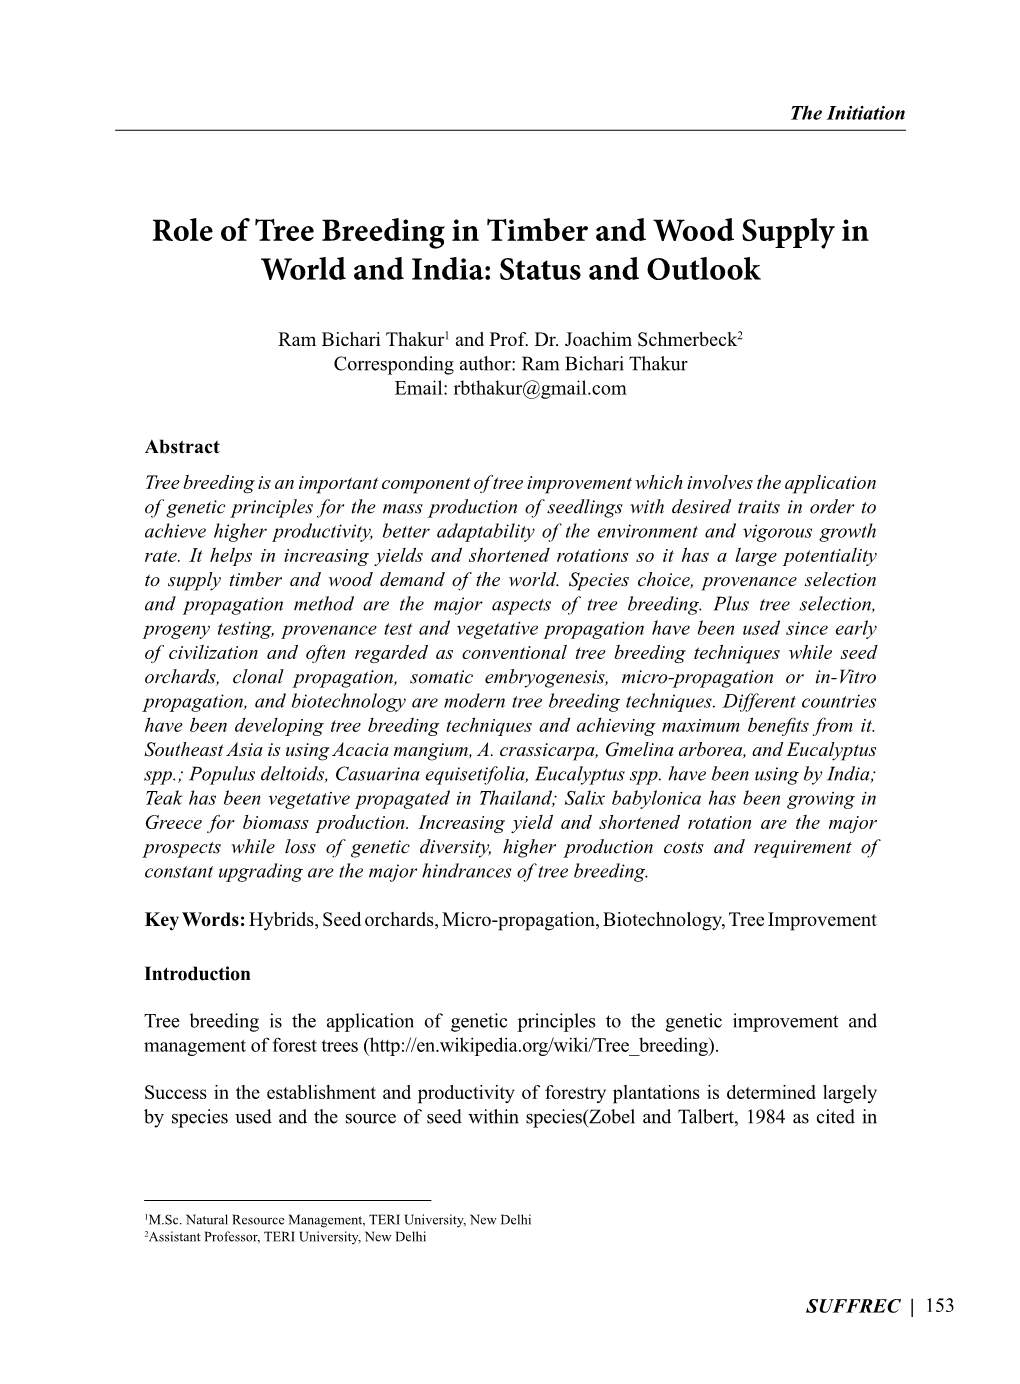 Role of Tree Breeding in Timber and Wood Supply in World and India: Status and Outlook